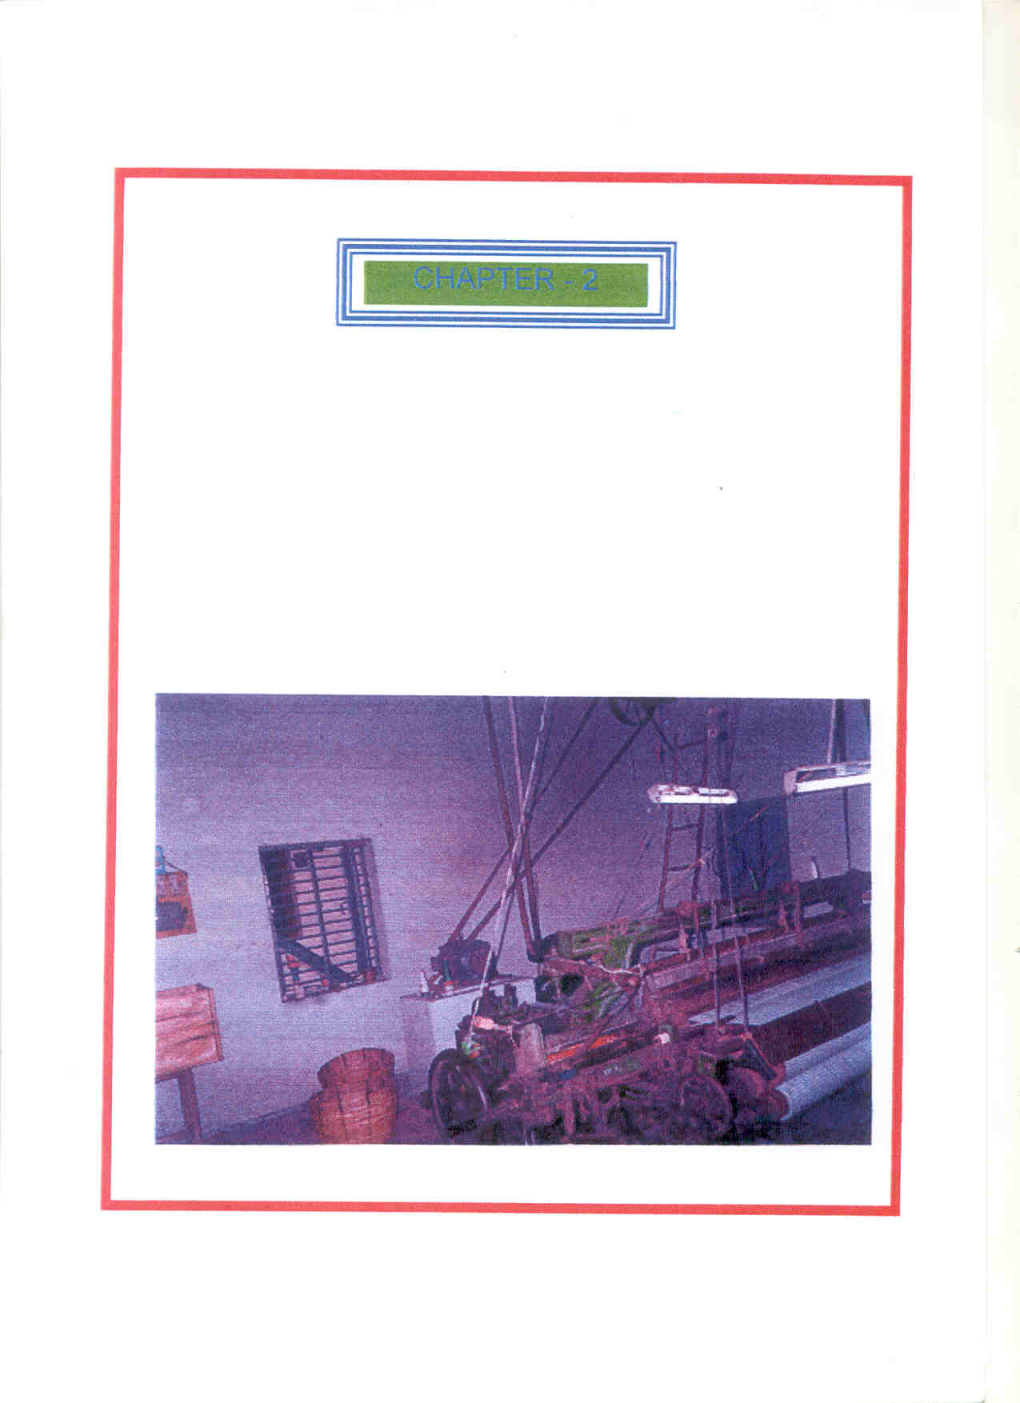 CHAPTER 2 Dispersal and Structure of the Powerloom Industry in Tamilnadu